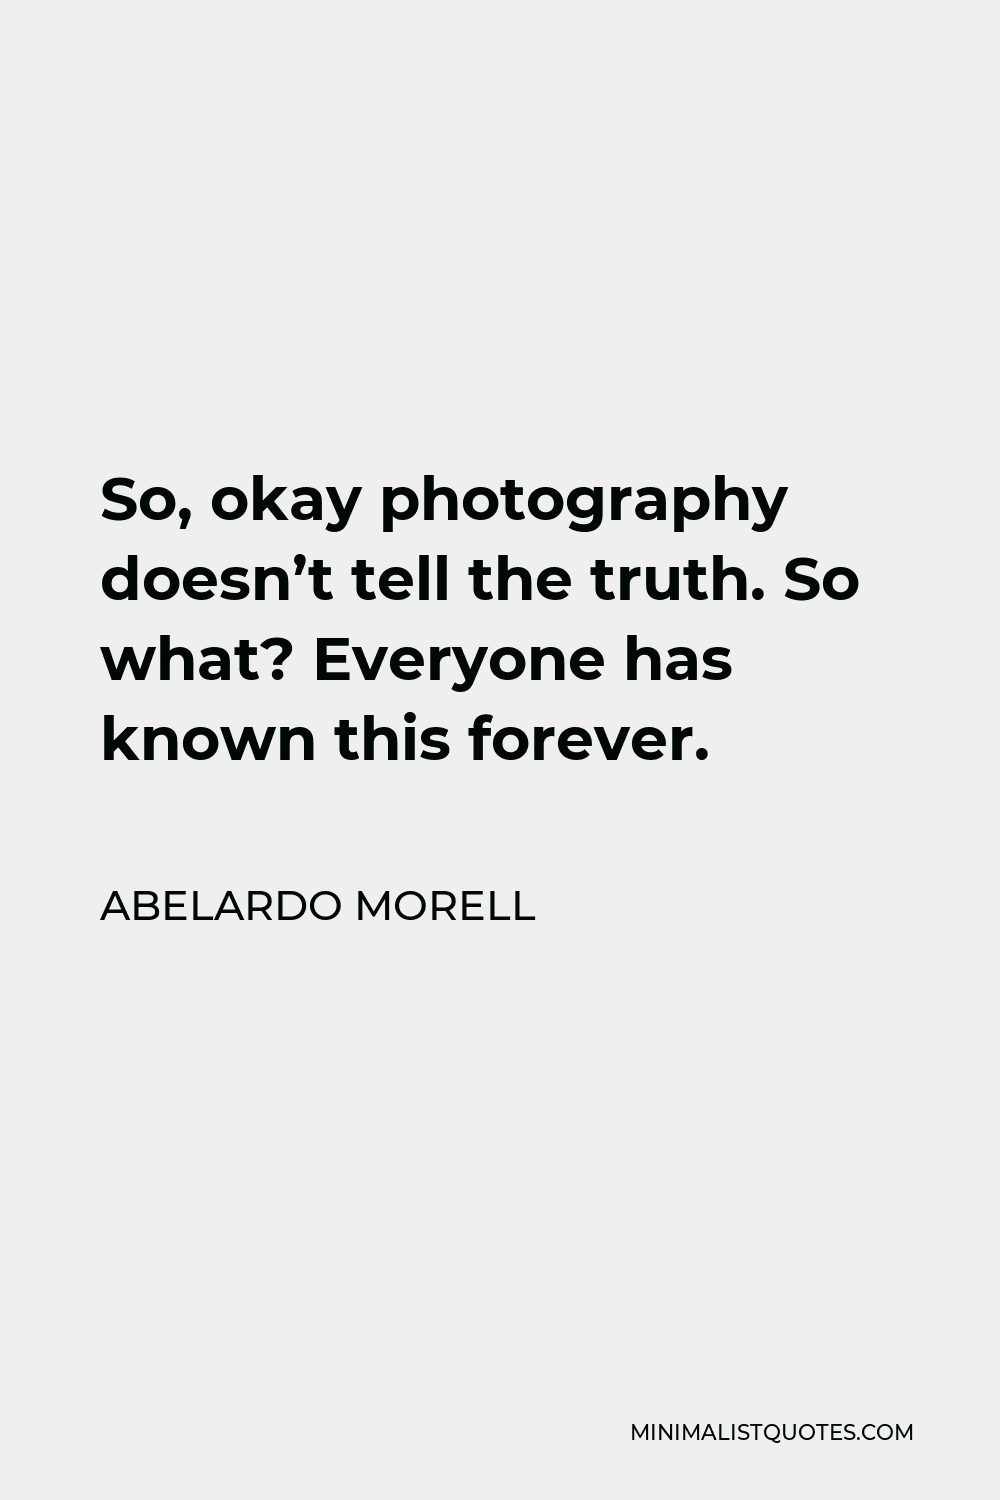 Abelardo Morell Quote - So, okay photography doesn’t tell the truth. So what? Everyone has known this forever.